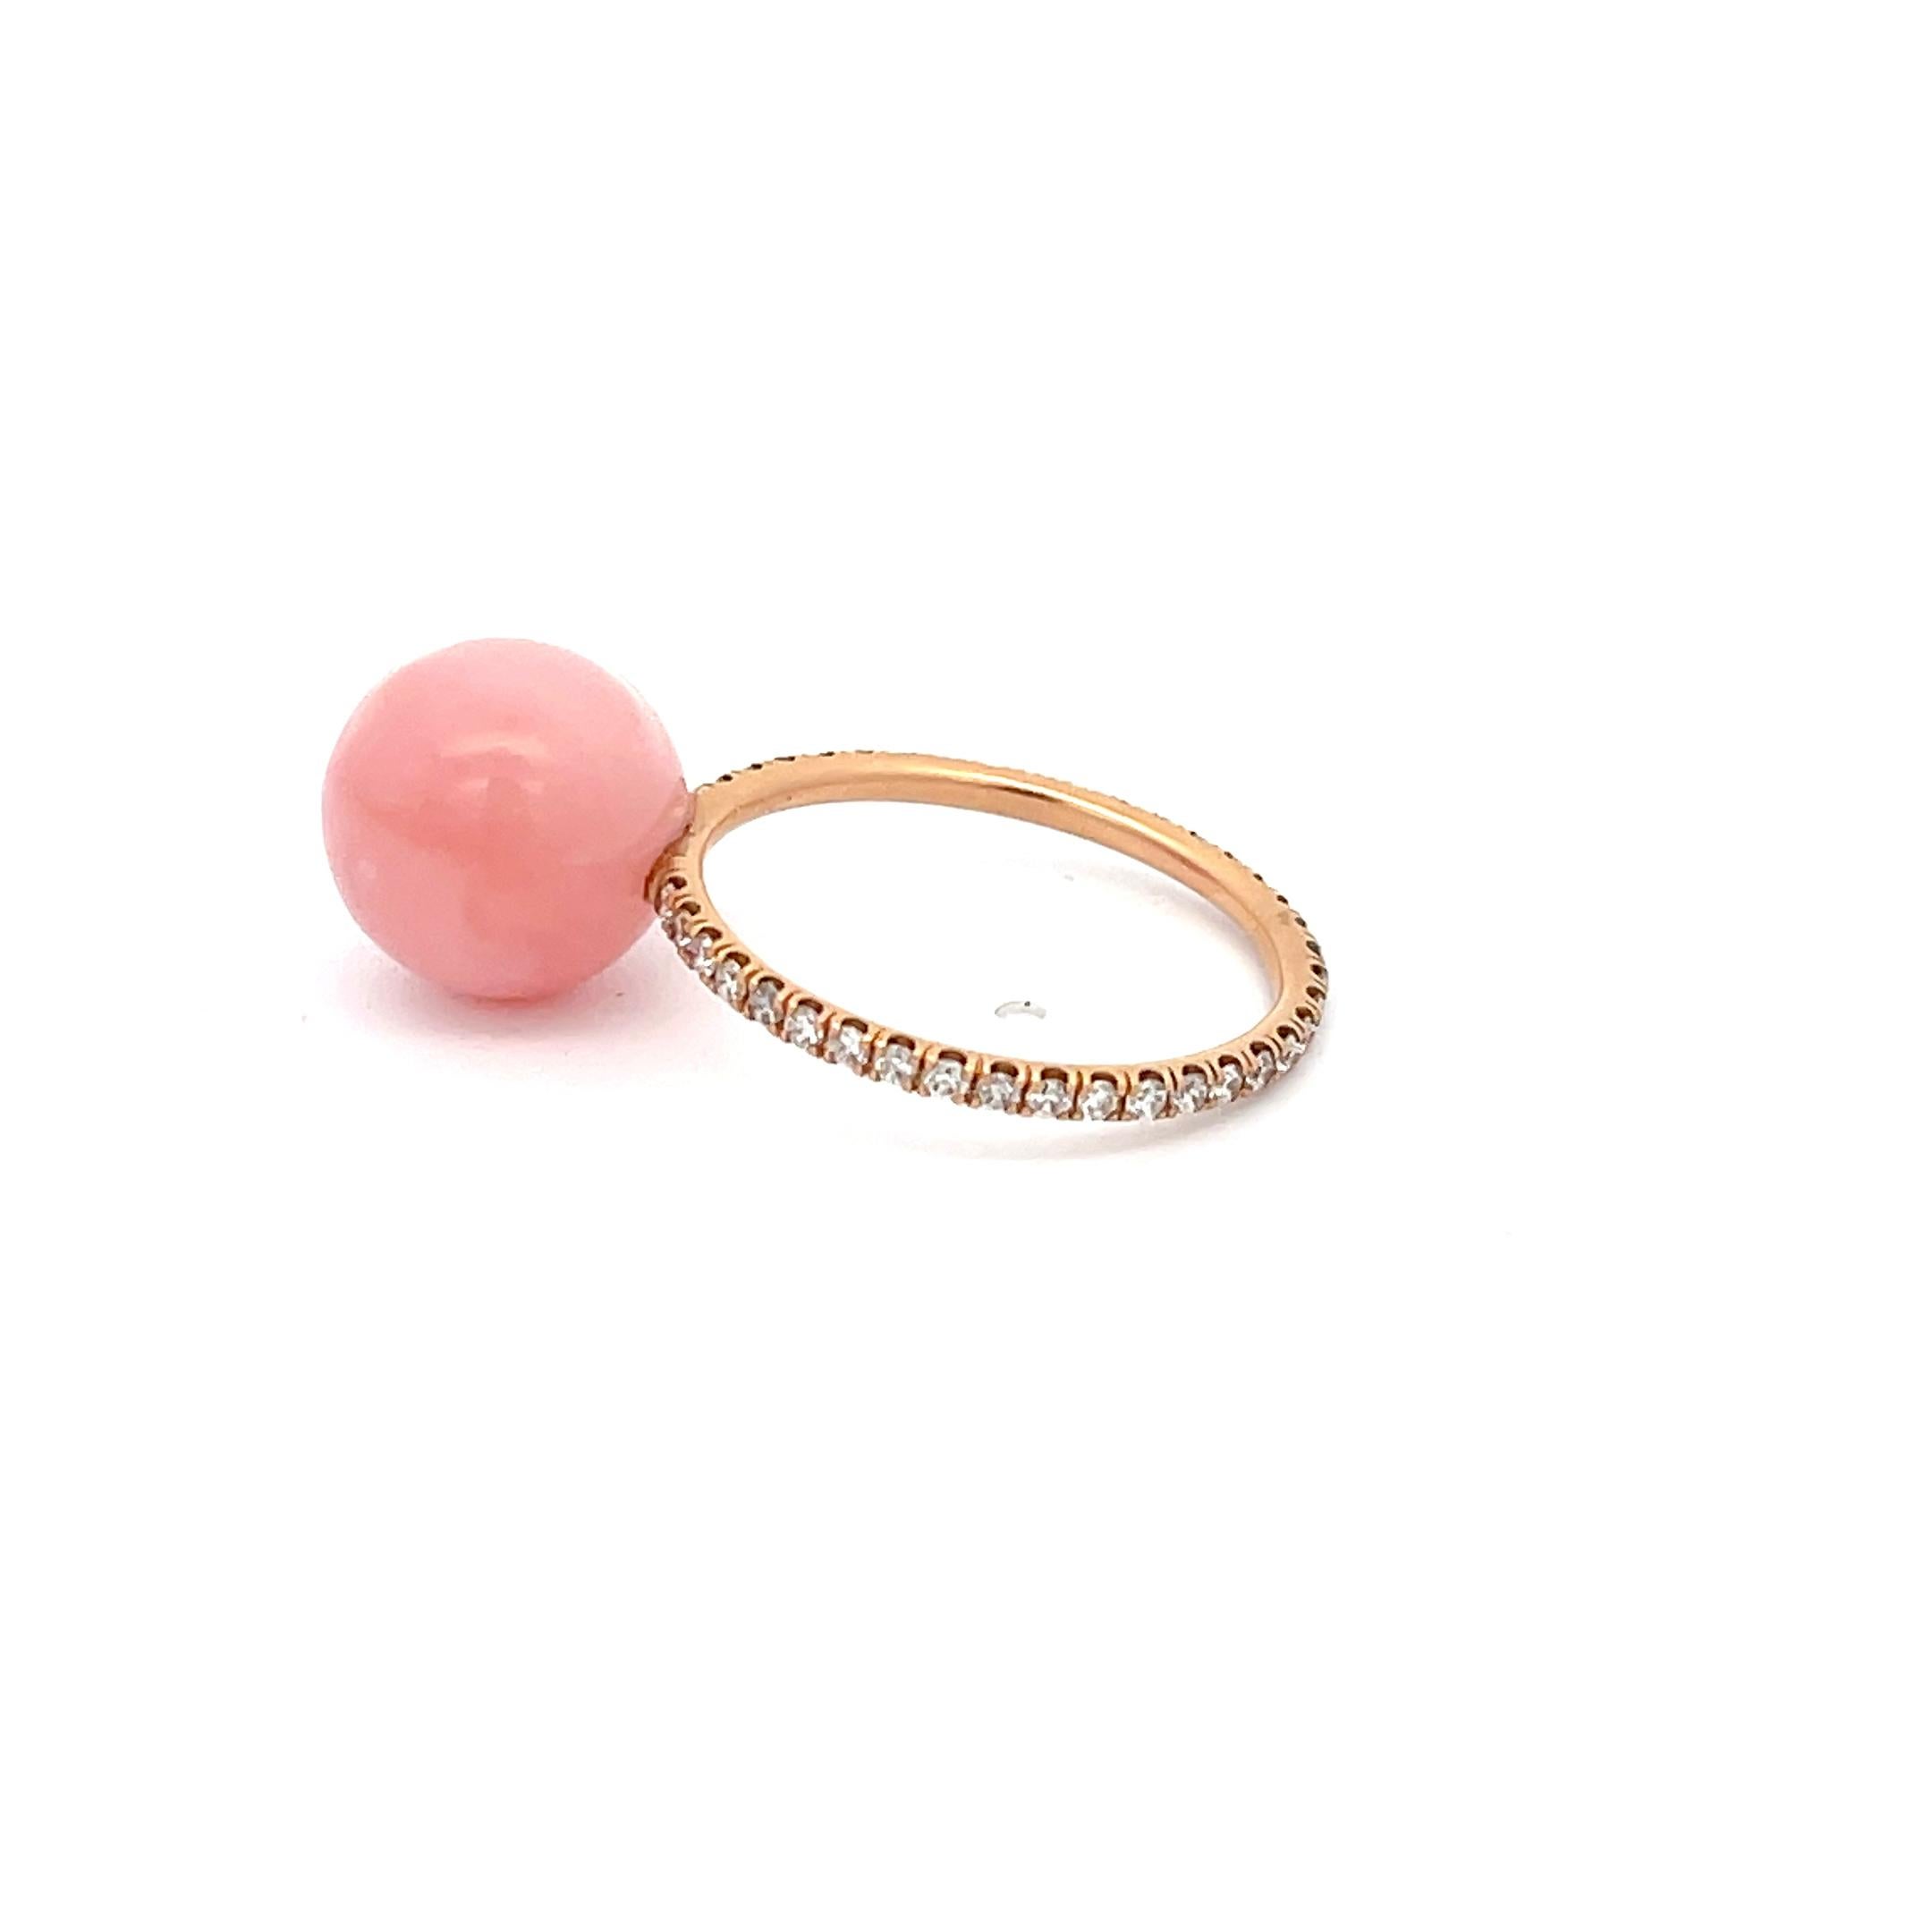 Contemporary Irene Neuwirth Pink Opal Diamond Ring 18K Rose Gold For Sale